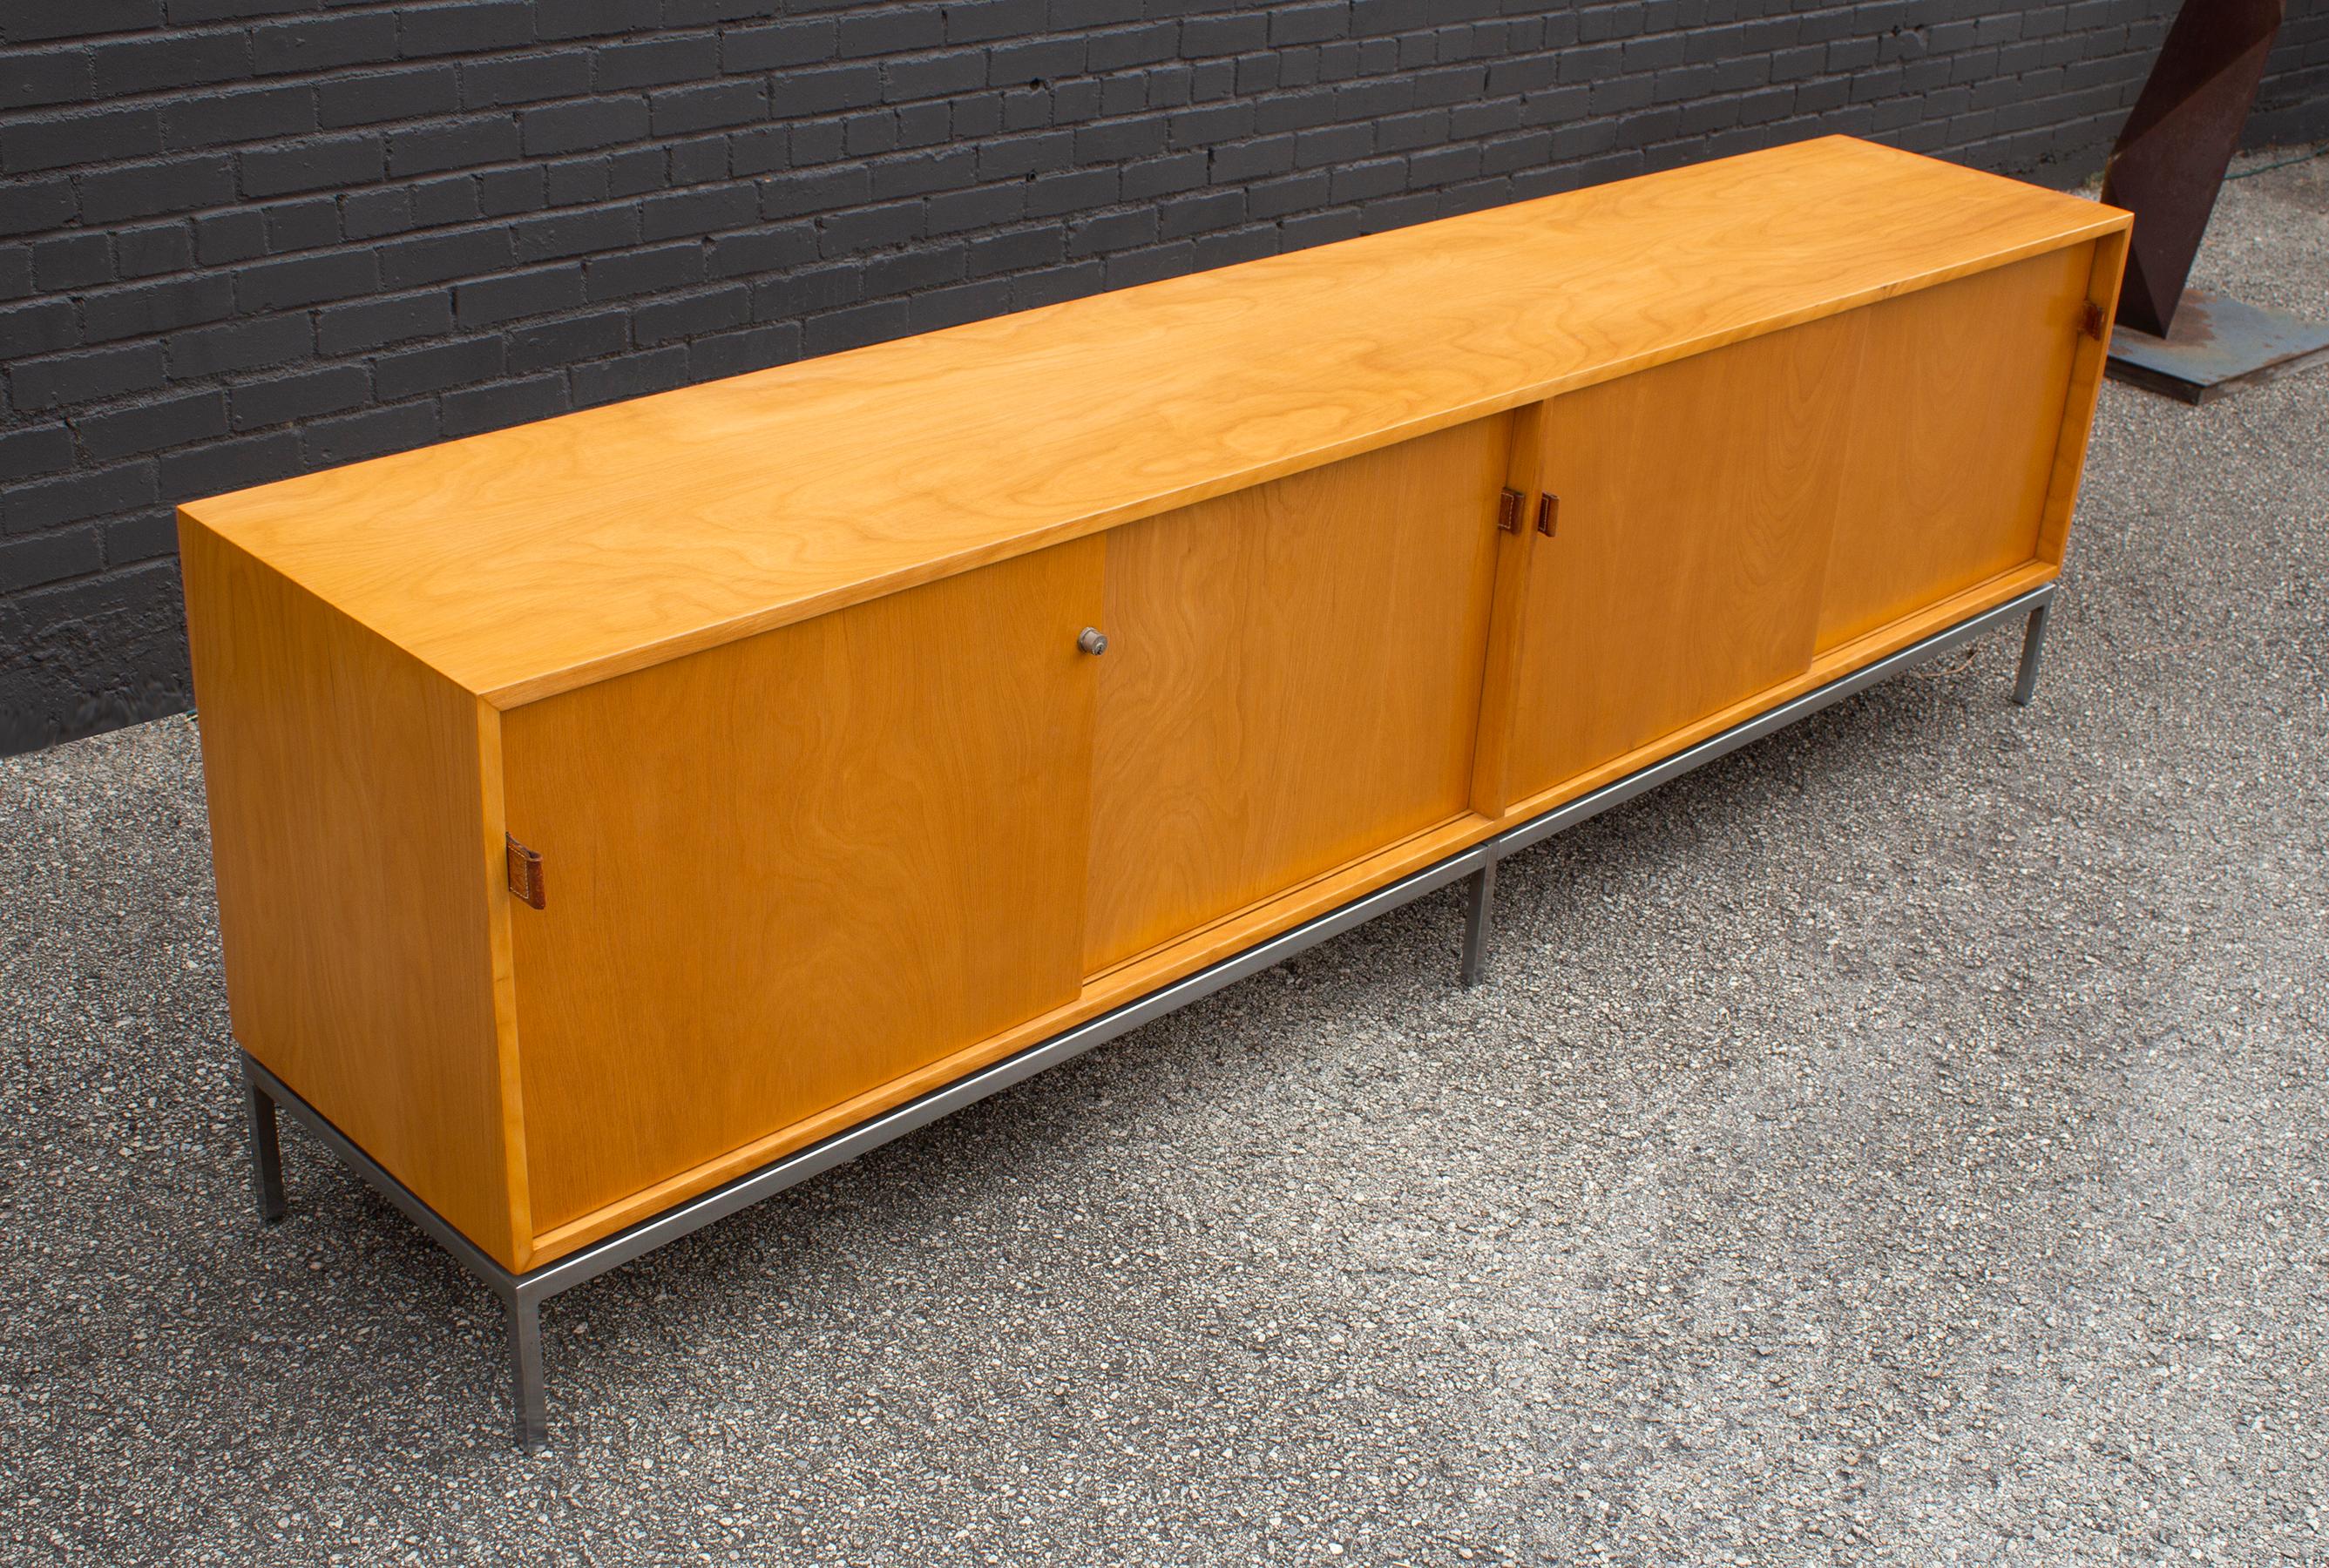 Florence Knoll Maple Credenza with Leather Pulls and Oak Drawers Early 1950s For Sale 3